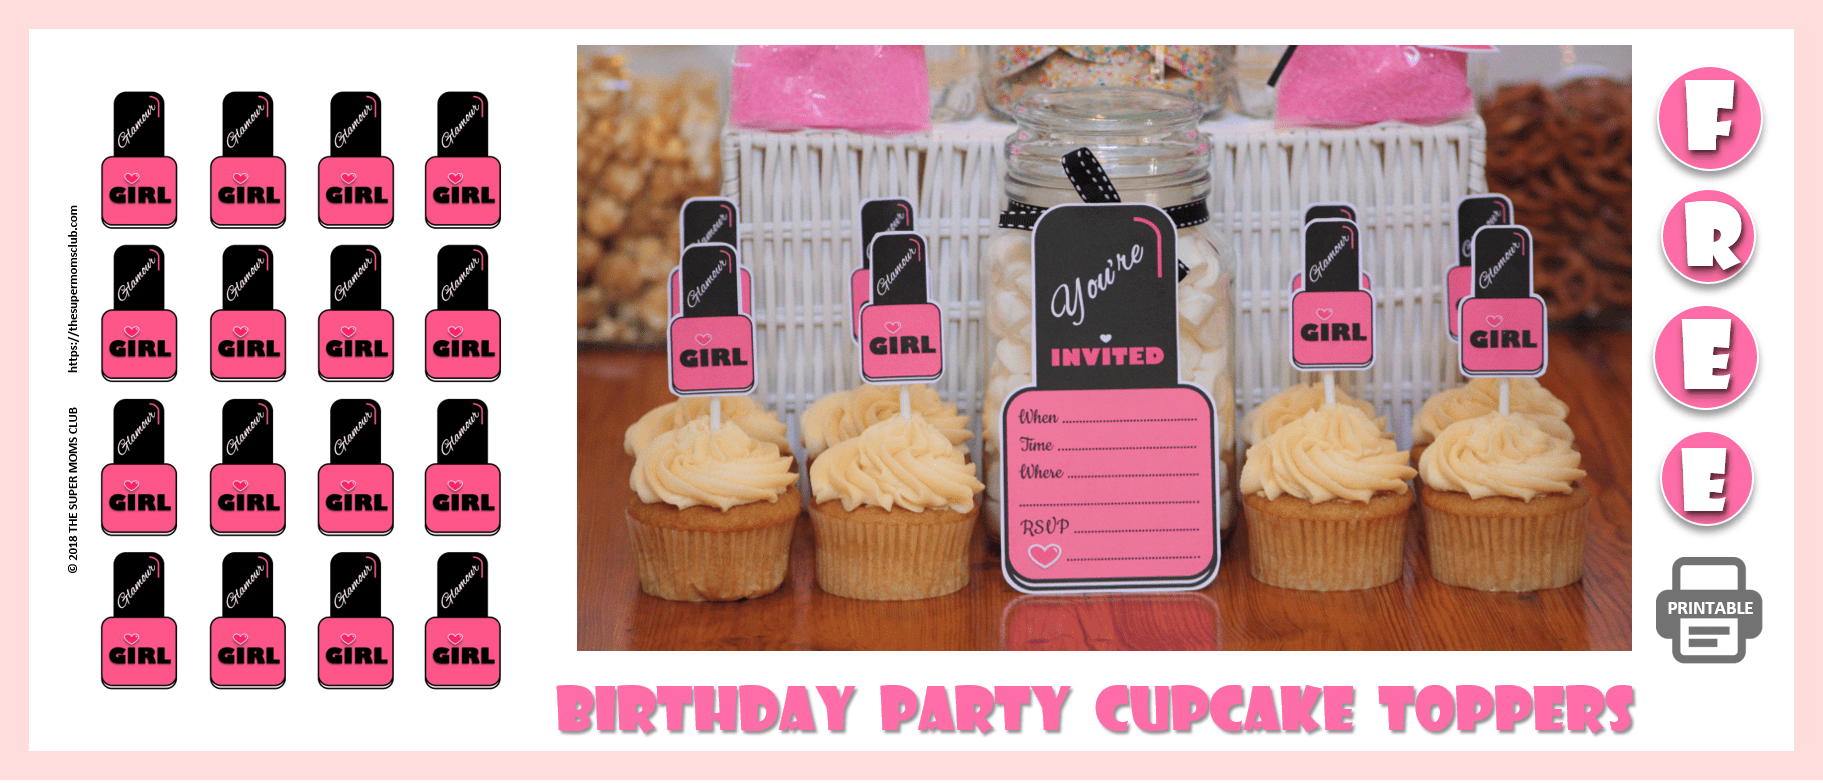 Make-up Themed Birthday Party FREE PRINTABLE Cupcake Toppers - The Super Moms Club